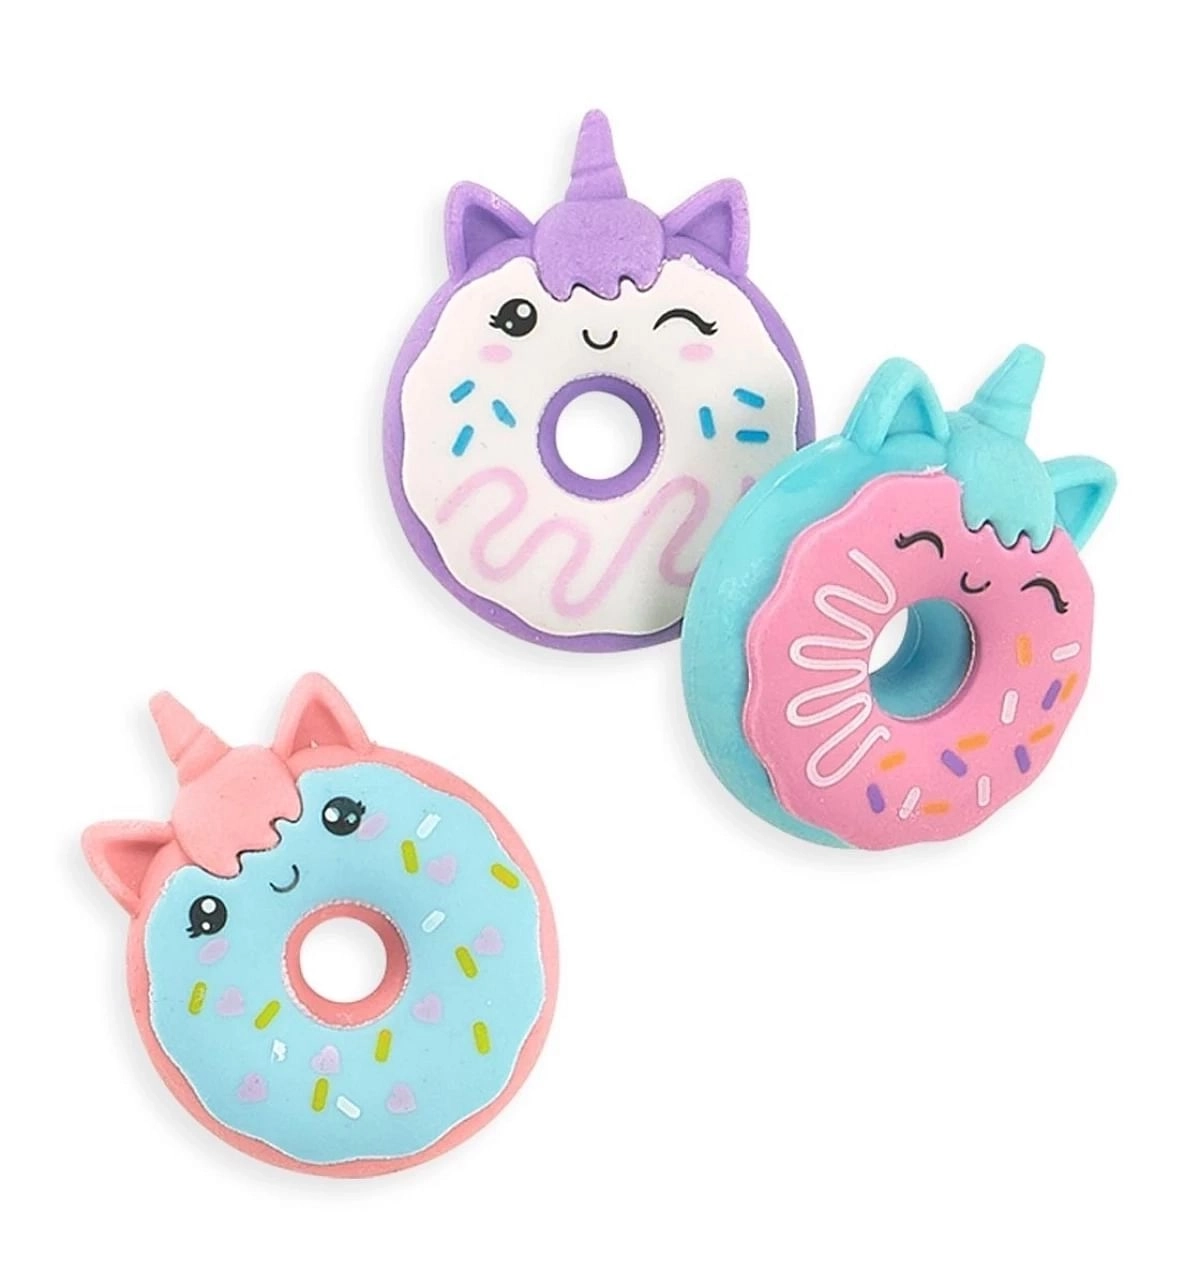 OOLY Magic Bakery Unicorn Donuts Scented Erasers, Erasers for Art, School, and Office Use, Classroom Set, Set of 3, Multicolour, 6Y+